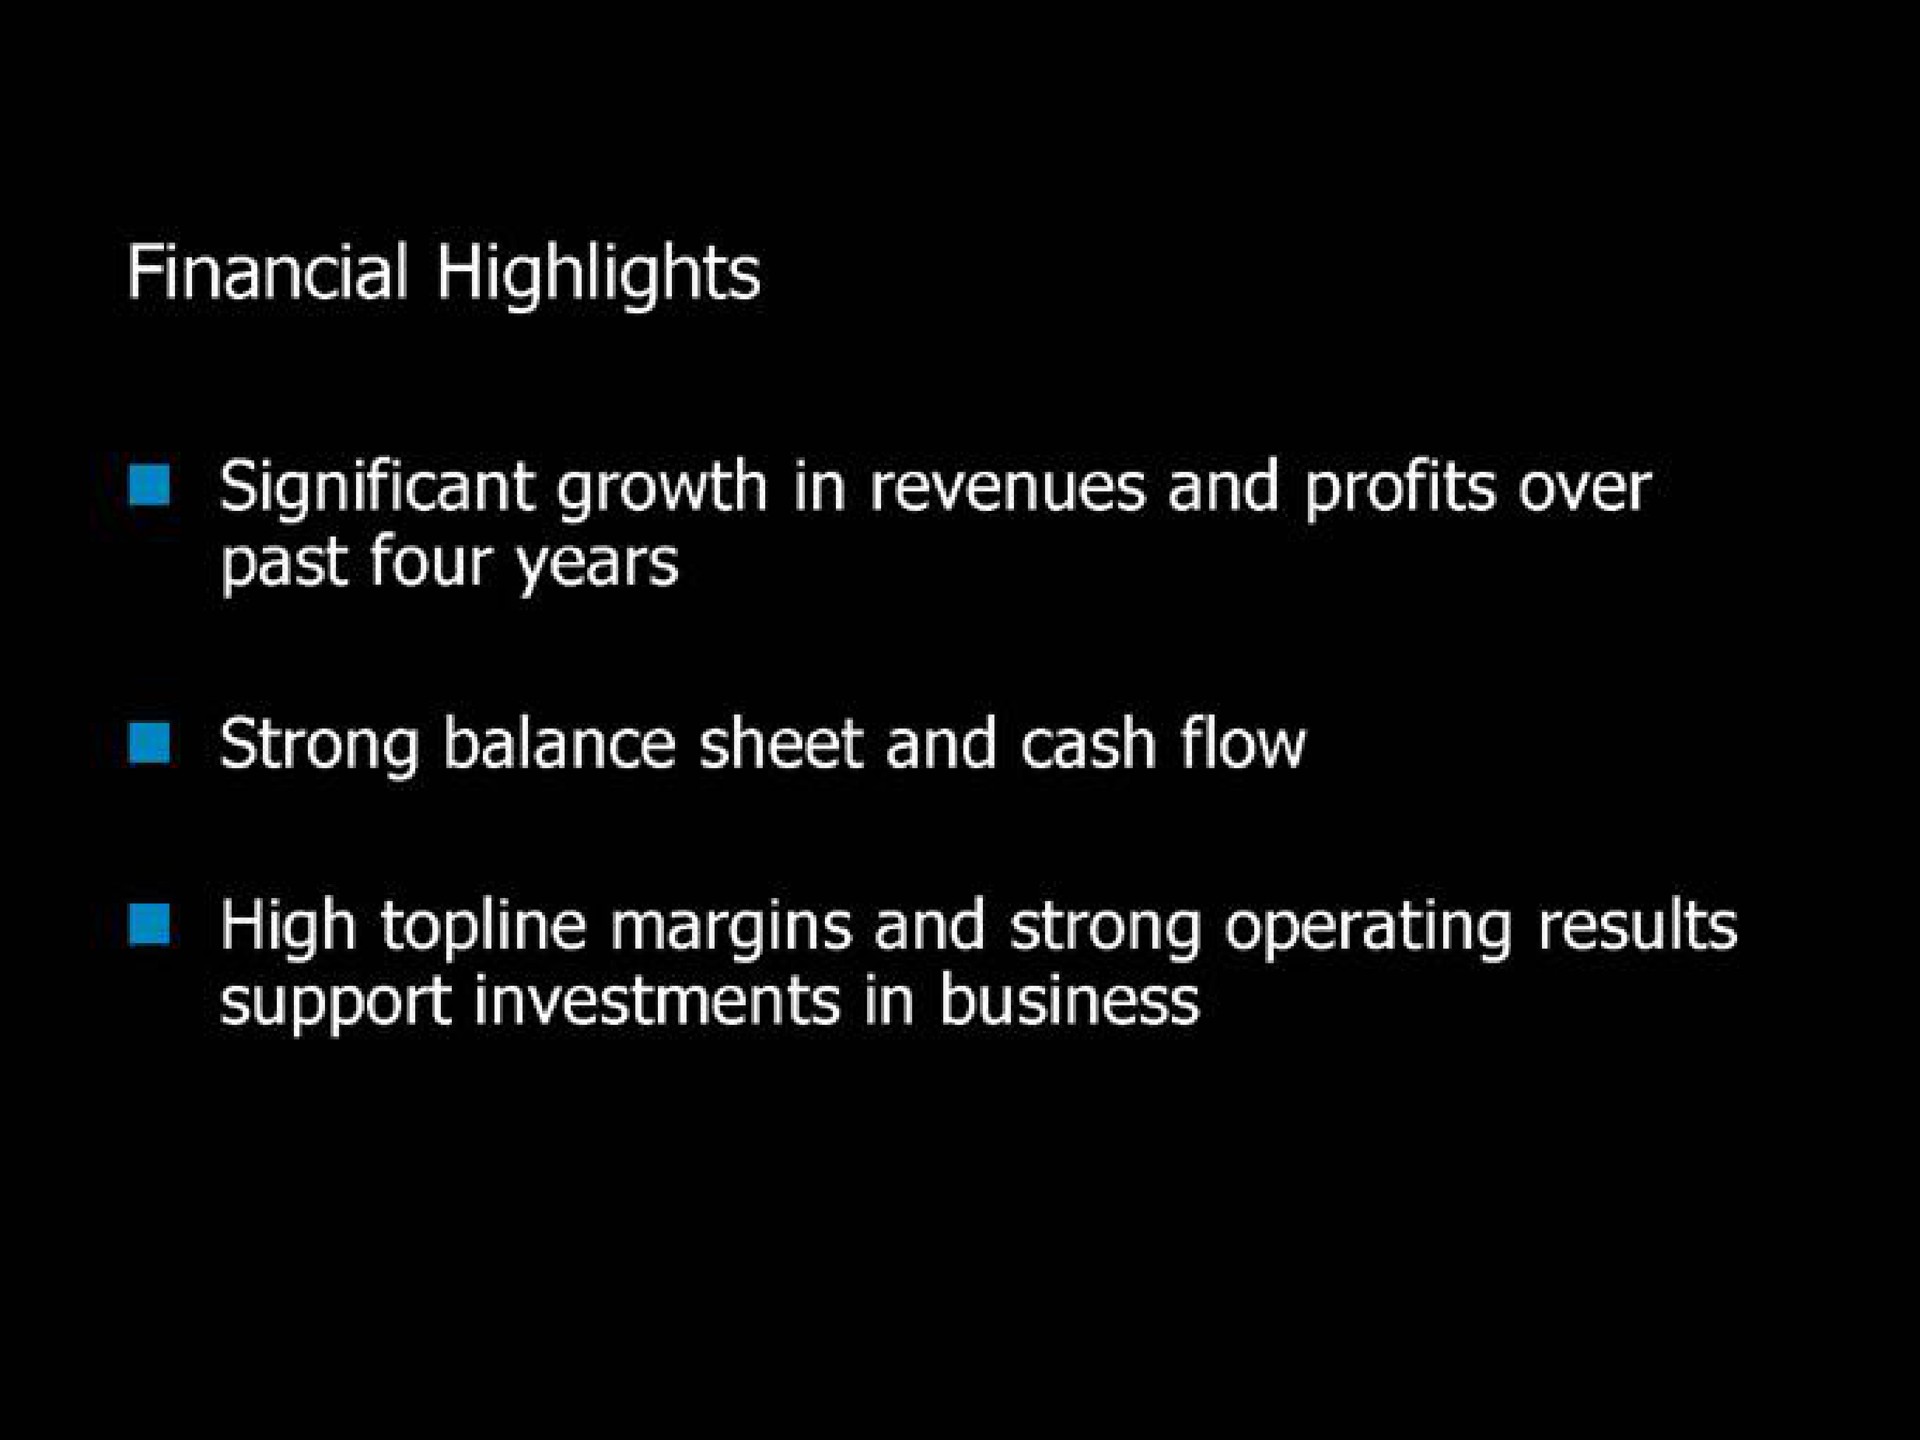 financial highlights strong balance sheet and cash flow high topline margins and strong operating results | Blockbuster Video